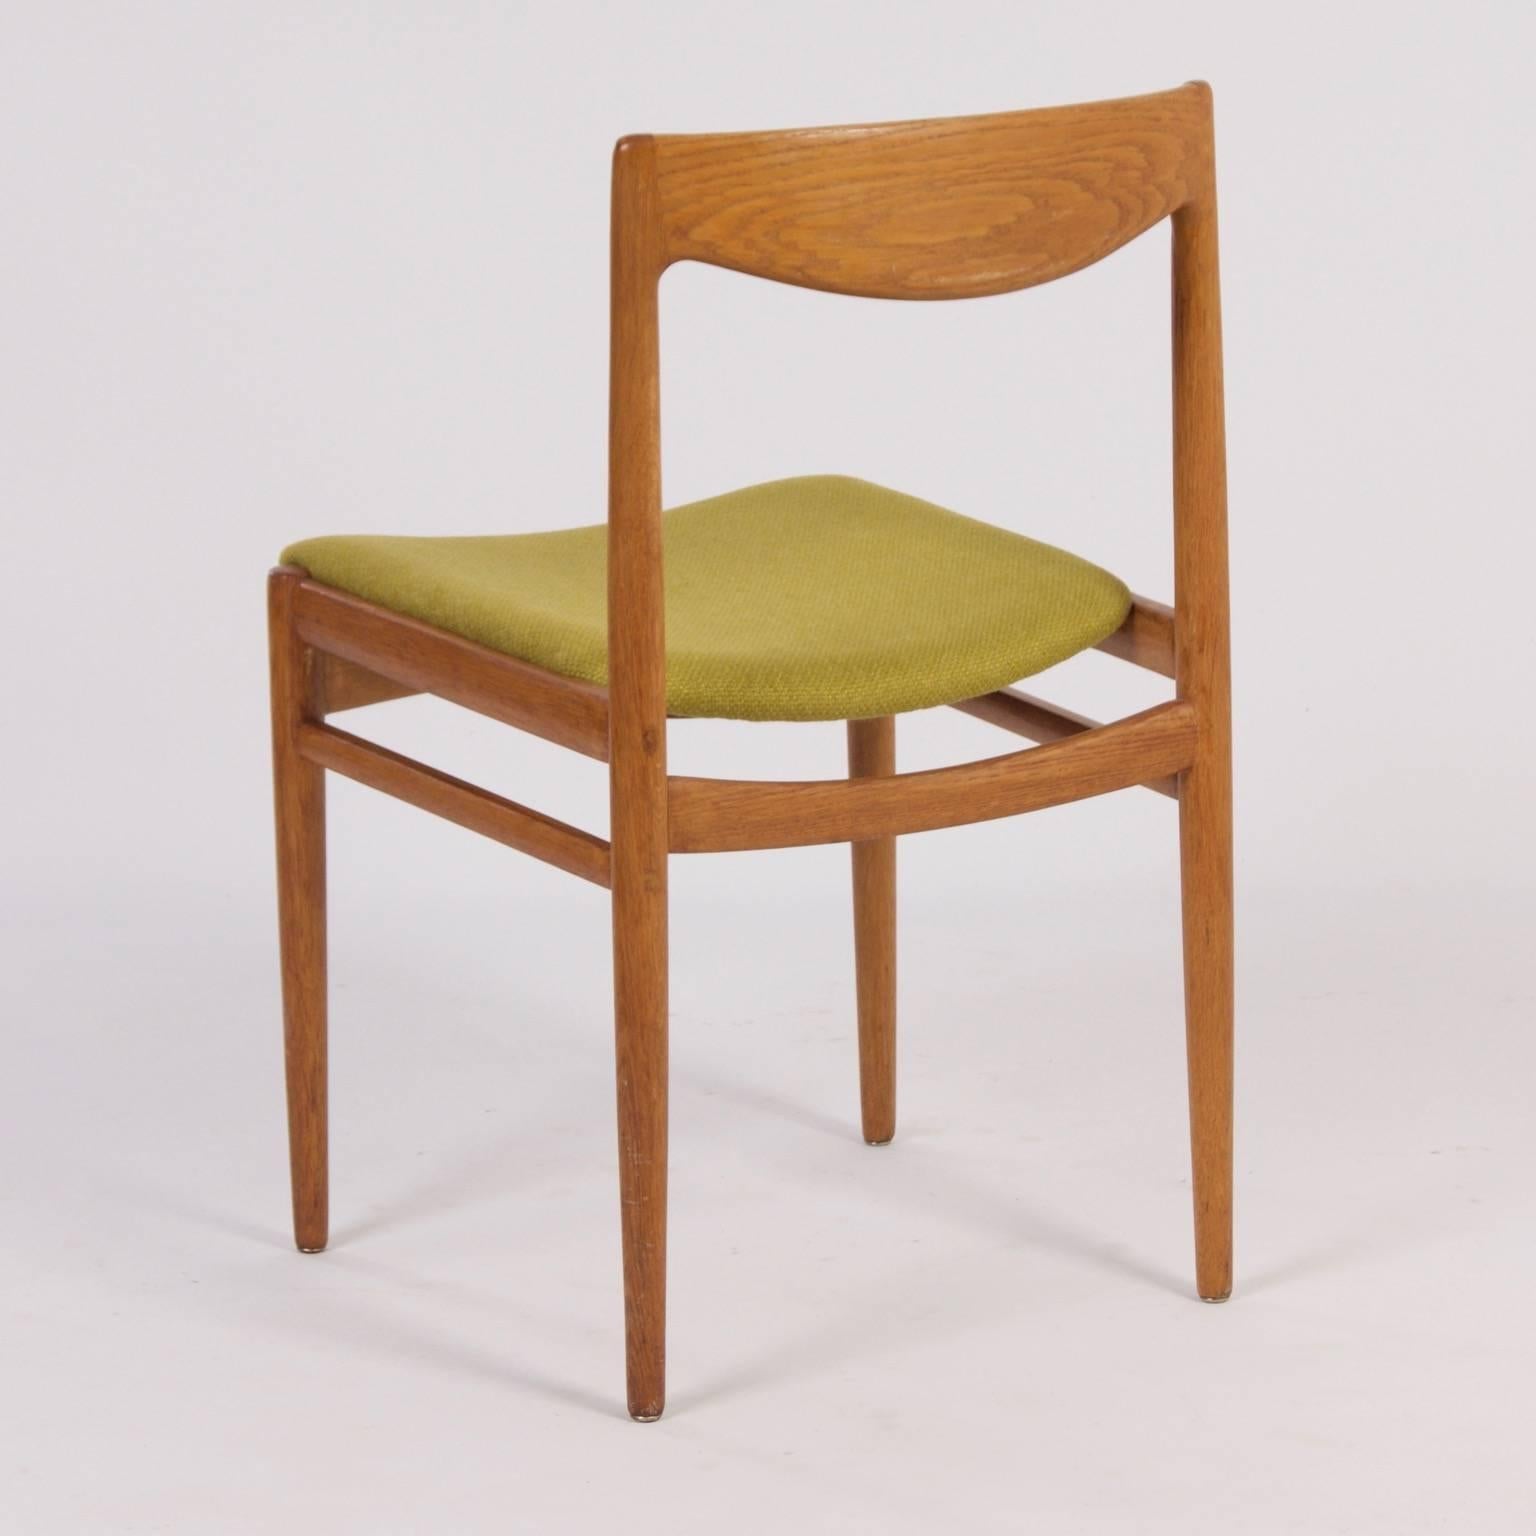 Green Danish Dining Chairs in the Style of Møller, Denmark, 1960s For Sale 3